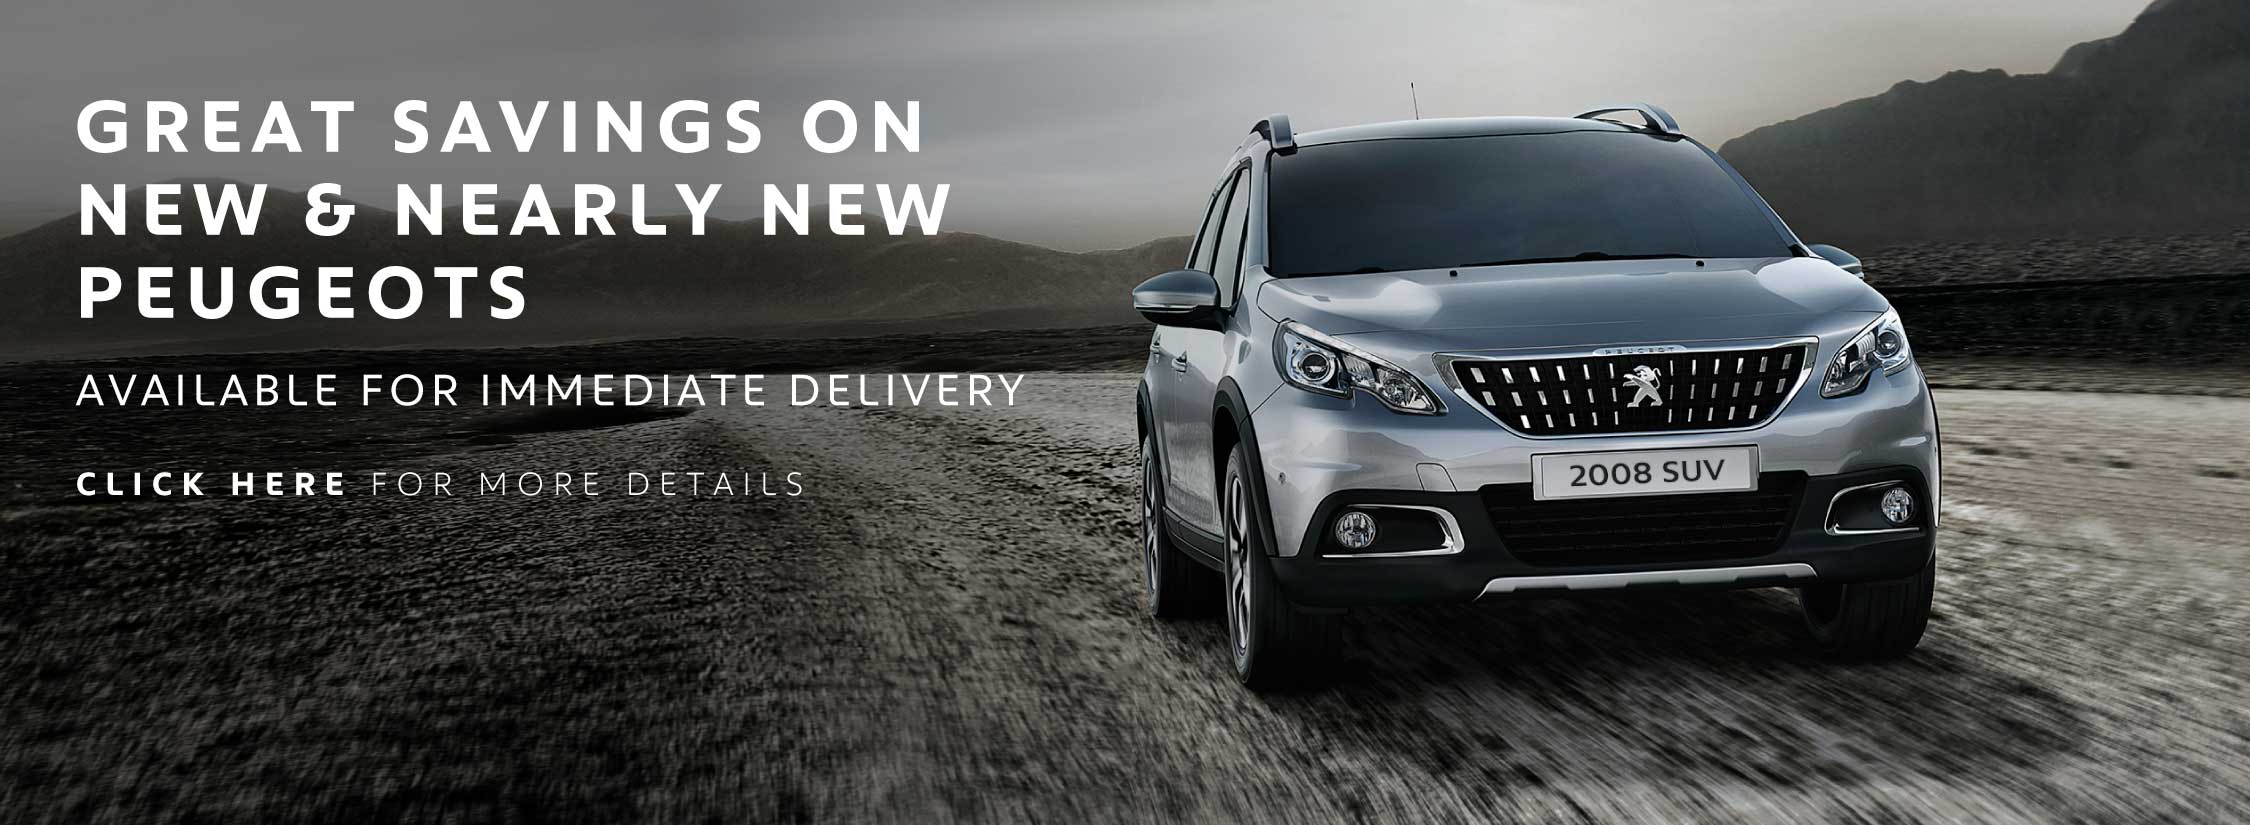 Peugeot Manager Specials Offers